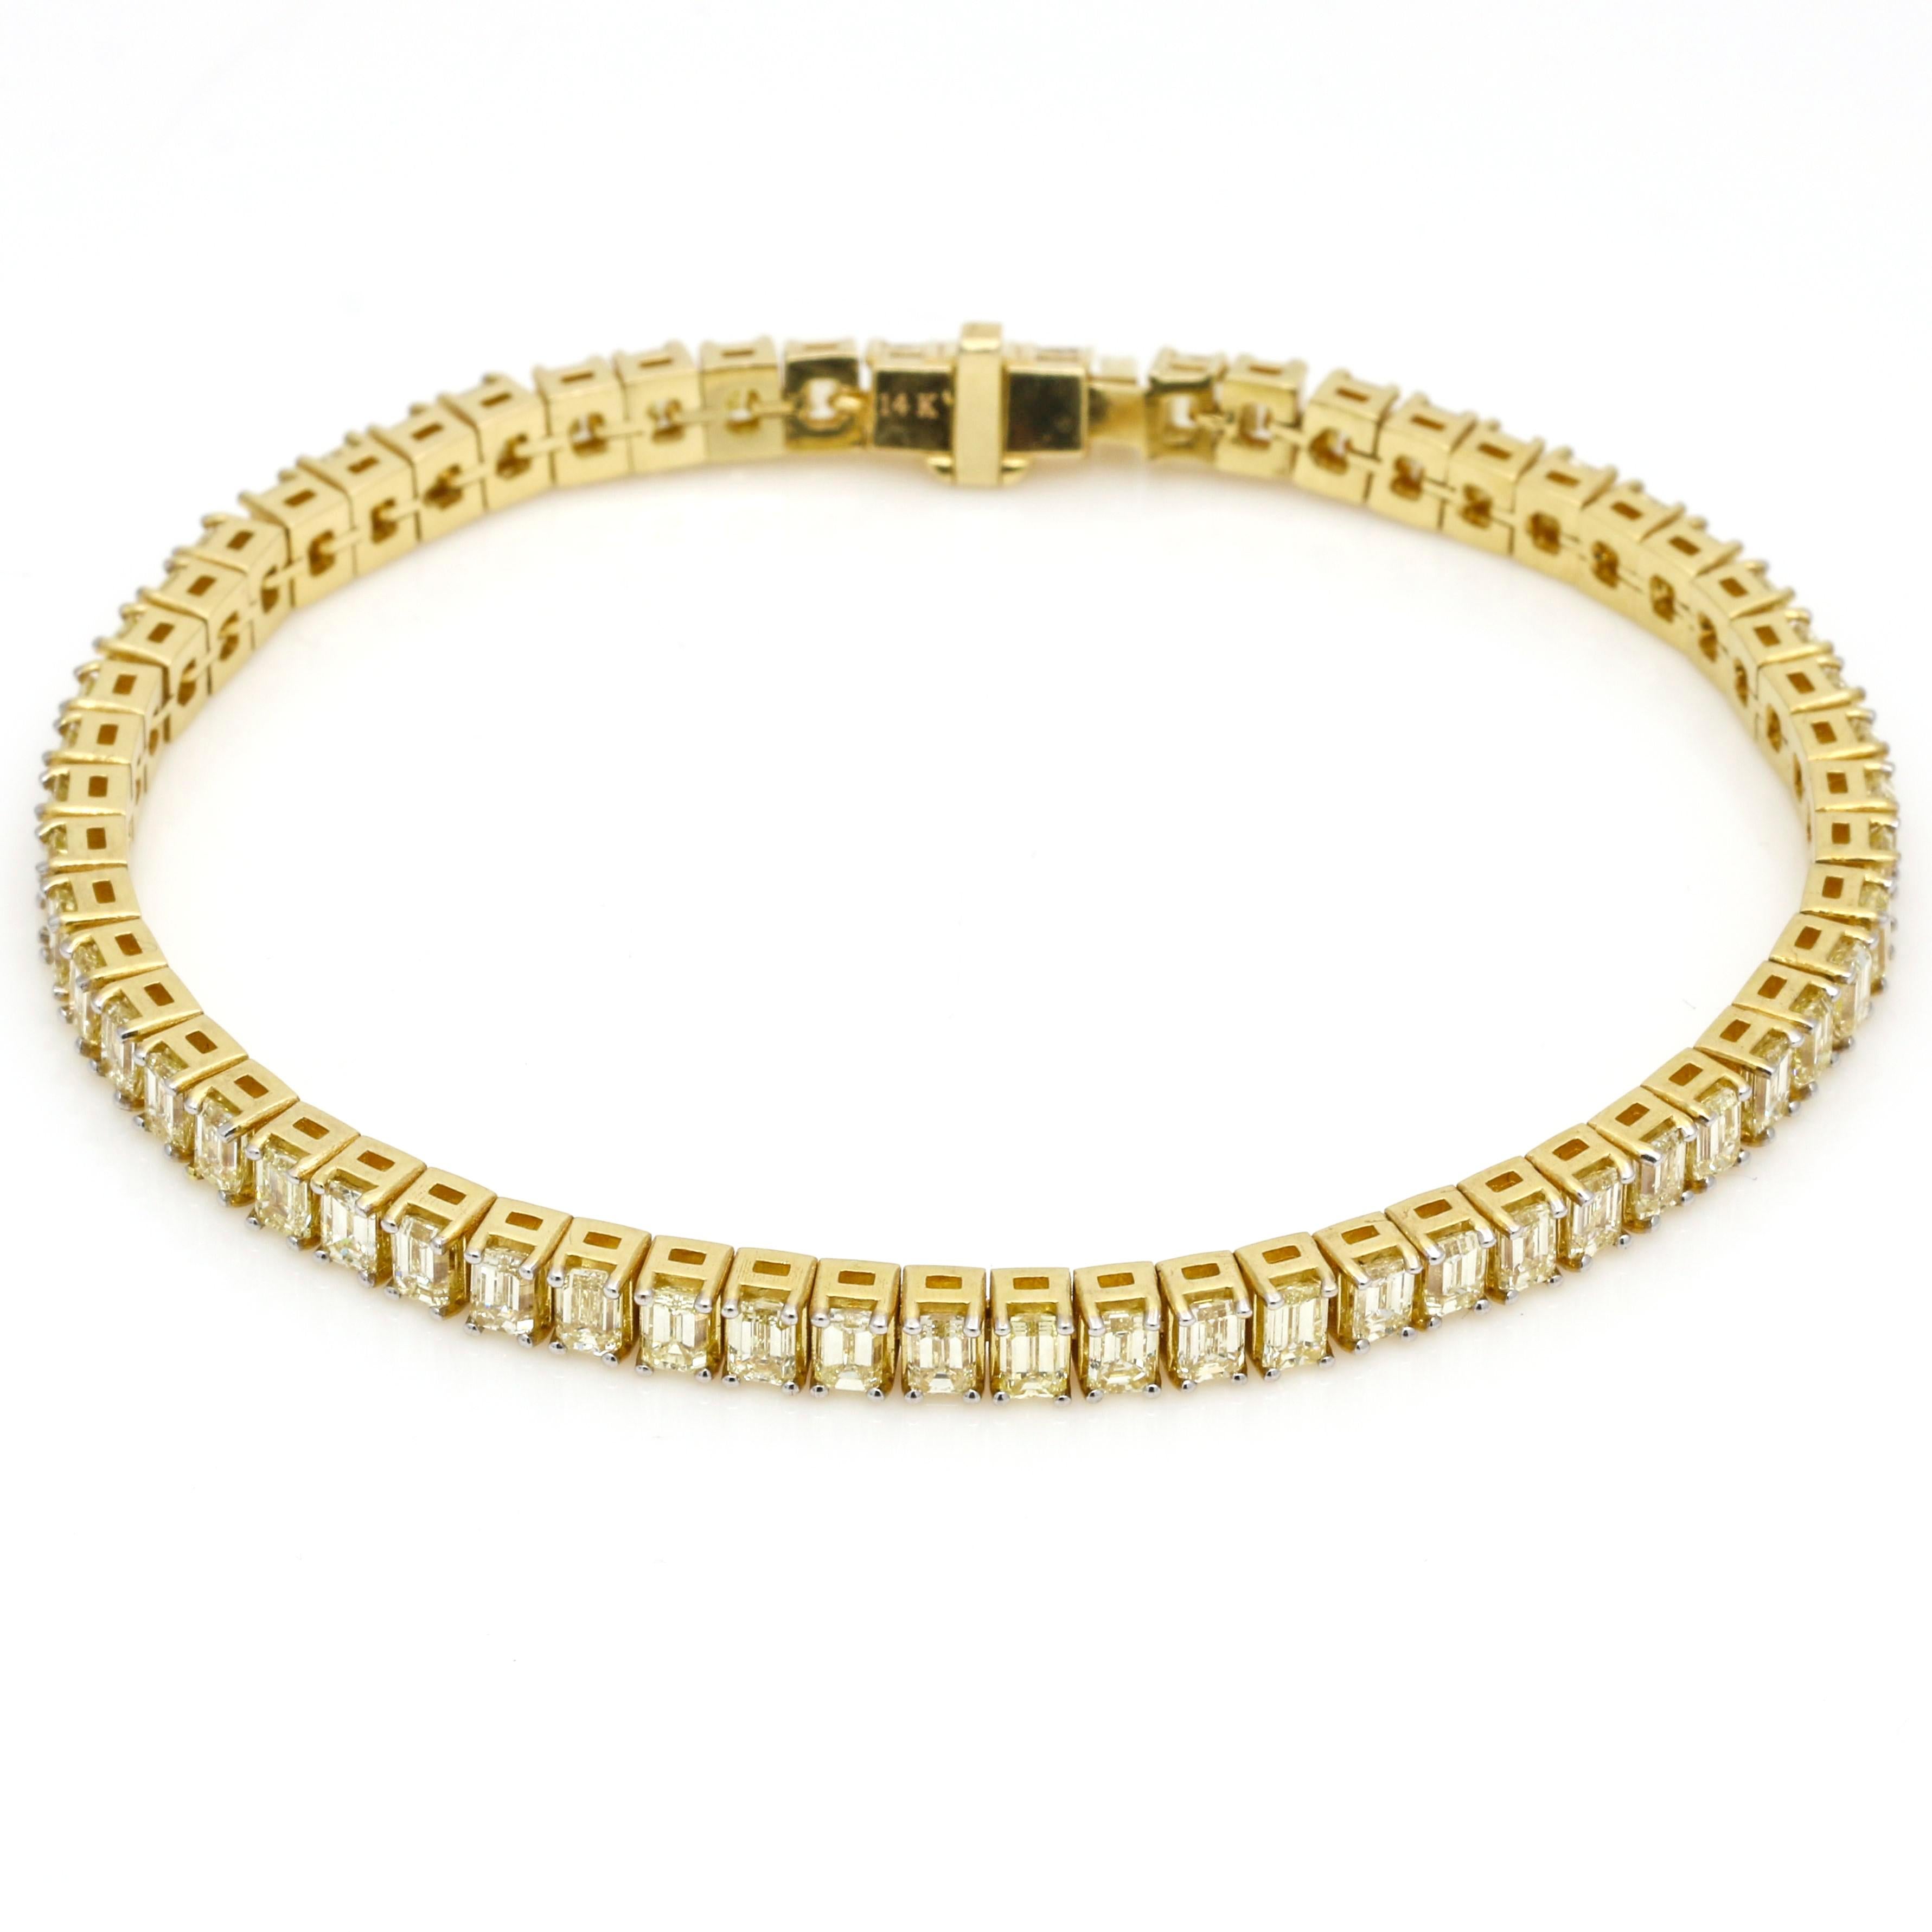 This stunning diamond tennis bracelet is crafted in 14k yellow gold. With 8.97 carats of natural diamonds, you can add this to your collection or give it to someone special as a gift. The elegant slide tongue clasp makes this piece easy and